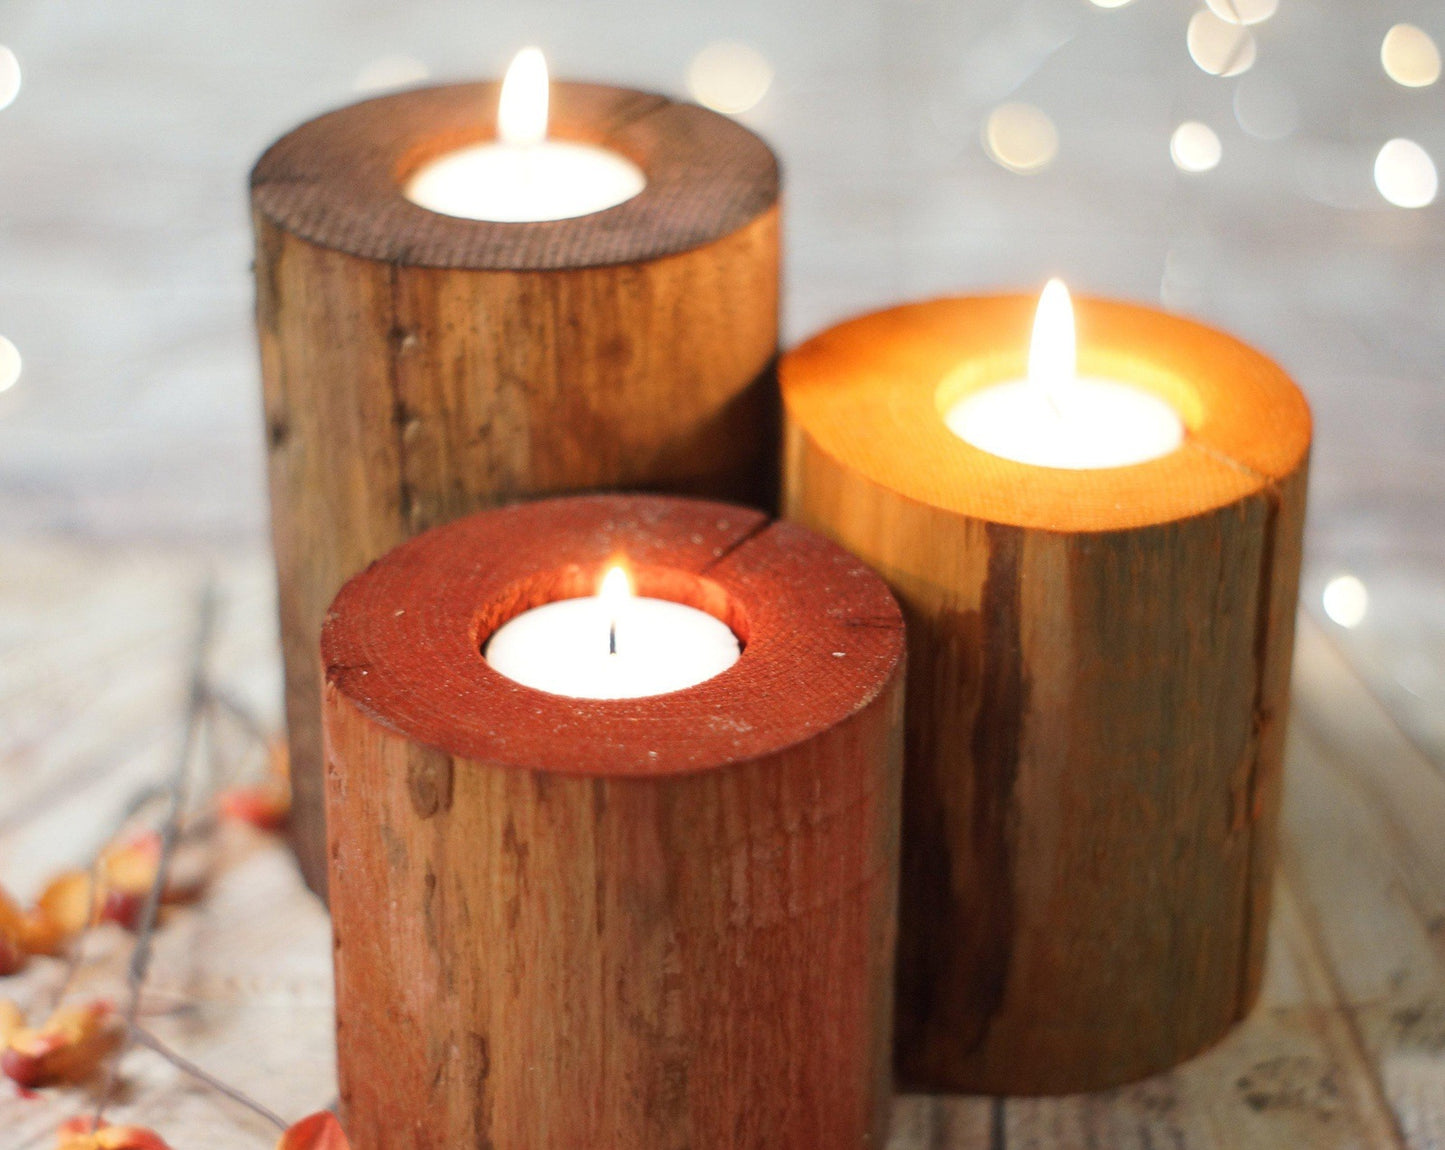 Log Candle holder set, Harvest Colors, Thanksgiving Table-Candle Holders-GFT Woodcraft